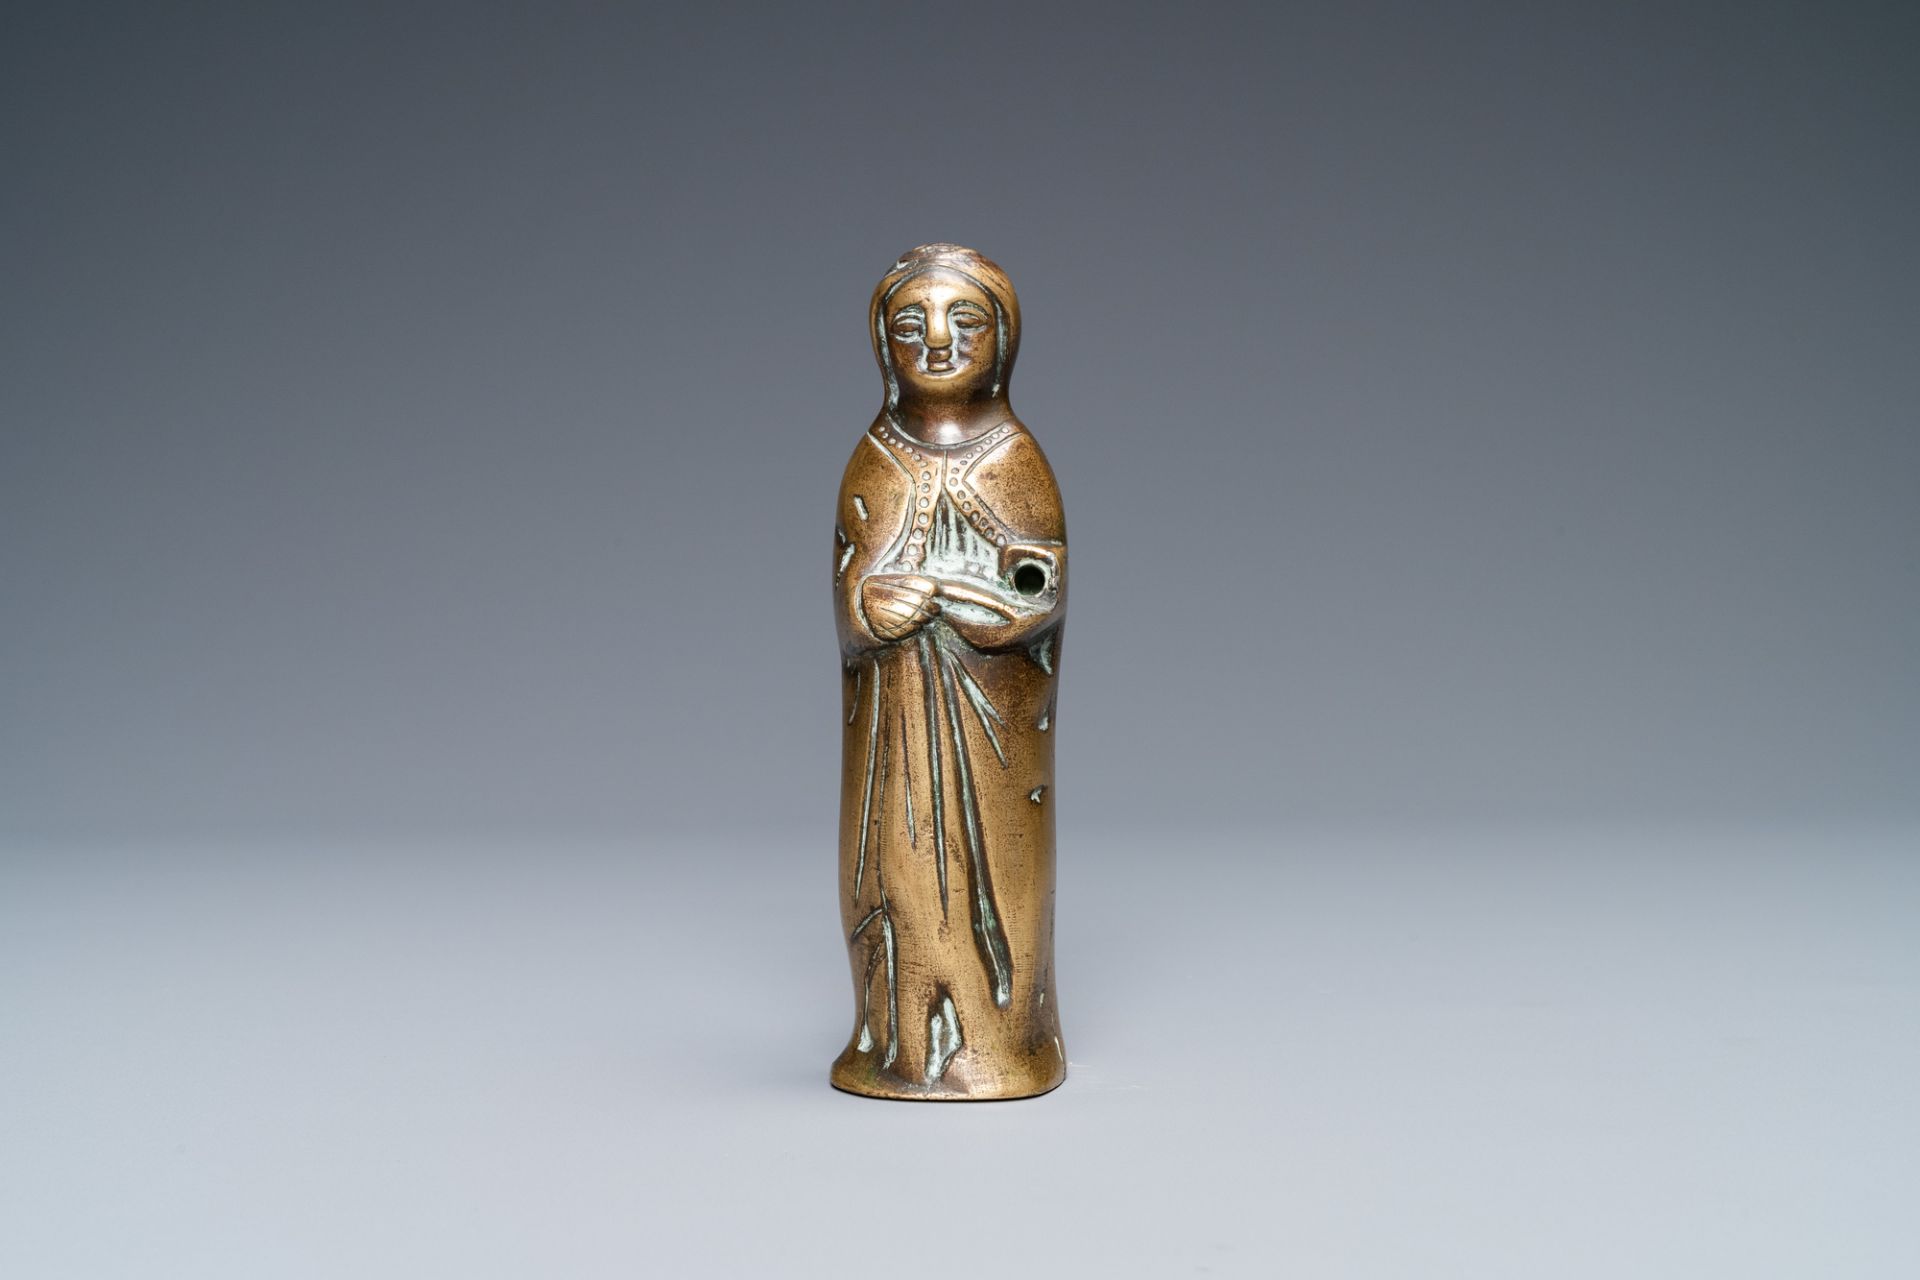 A bronze Madonna luster ornament, Flanders, 16th C. - Image 2 of 7